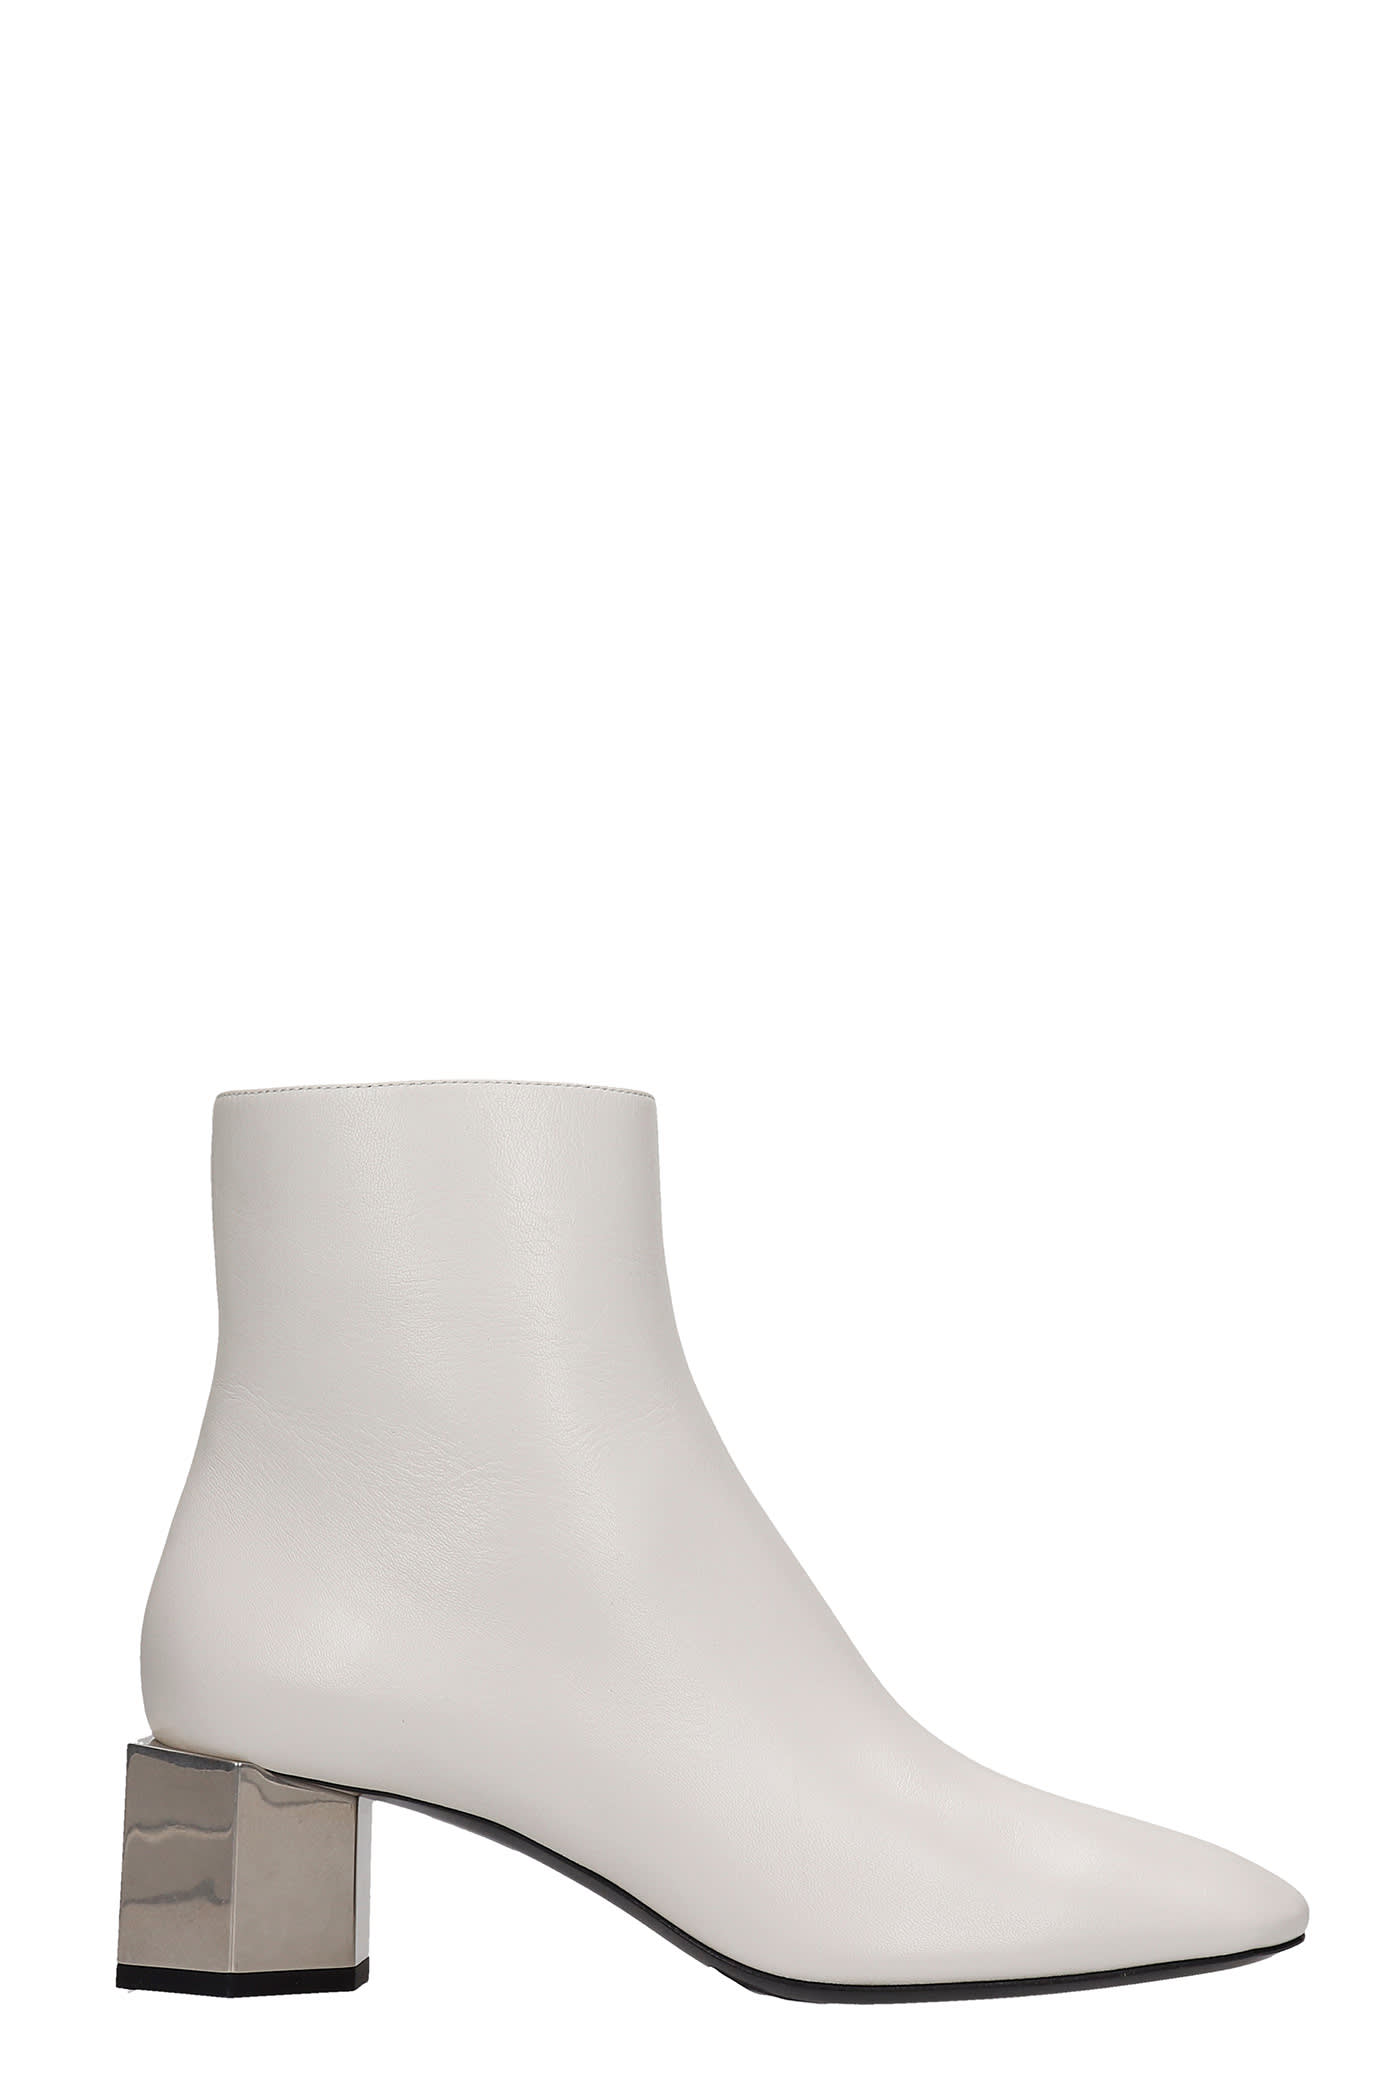 OFF-WHITE LOW HEELS ANKLE BOOTS IN WHITE LEATHER,OWID008S21LEA0010300